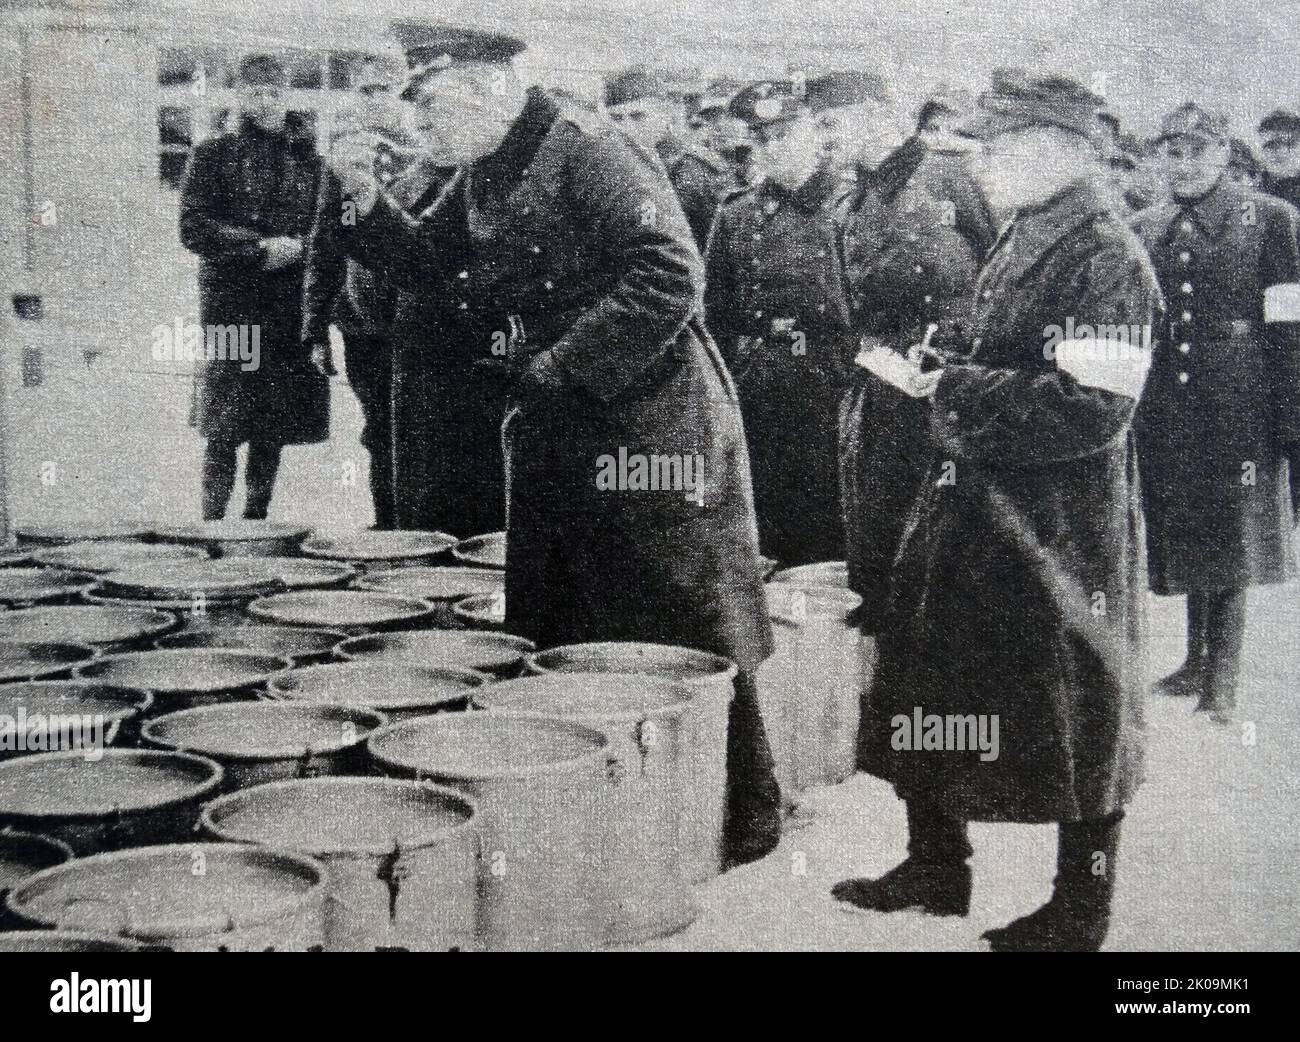 A German officer on duty in Wulzburg prisoner of war camp during World War II, samples the soup before it is served. According to the Red Cross Convention, prisoners should receive the same food as guards. Stock Photo